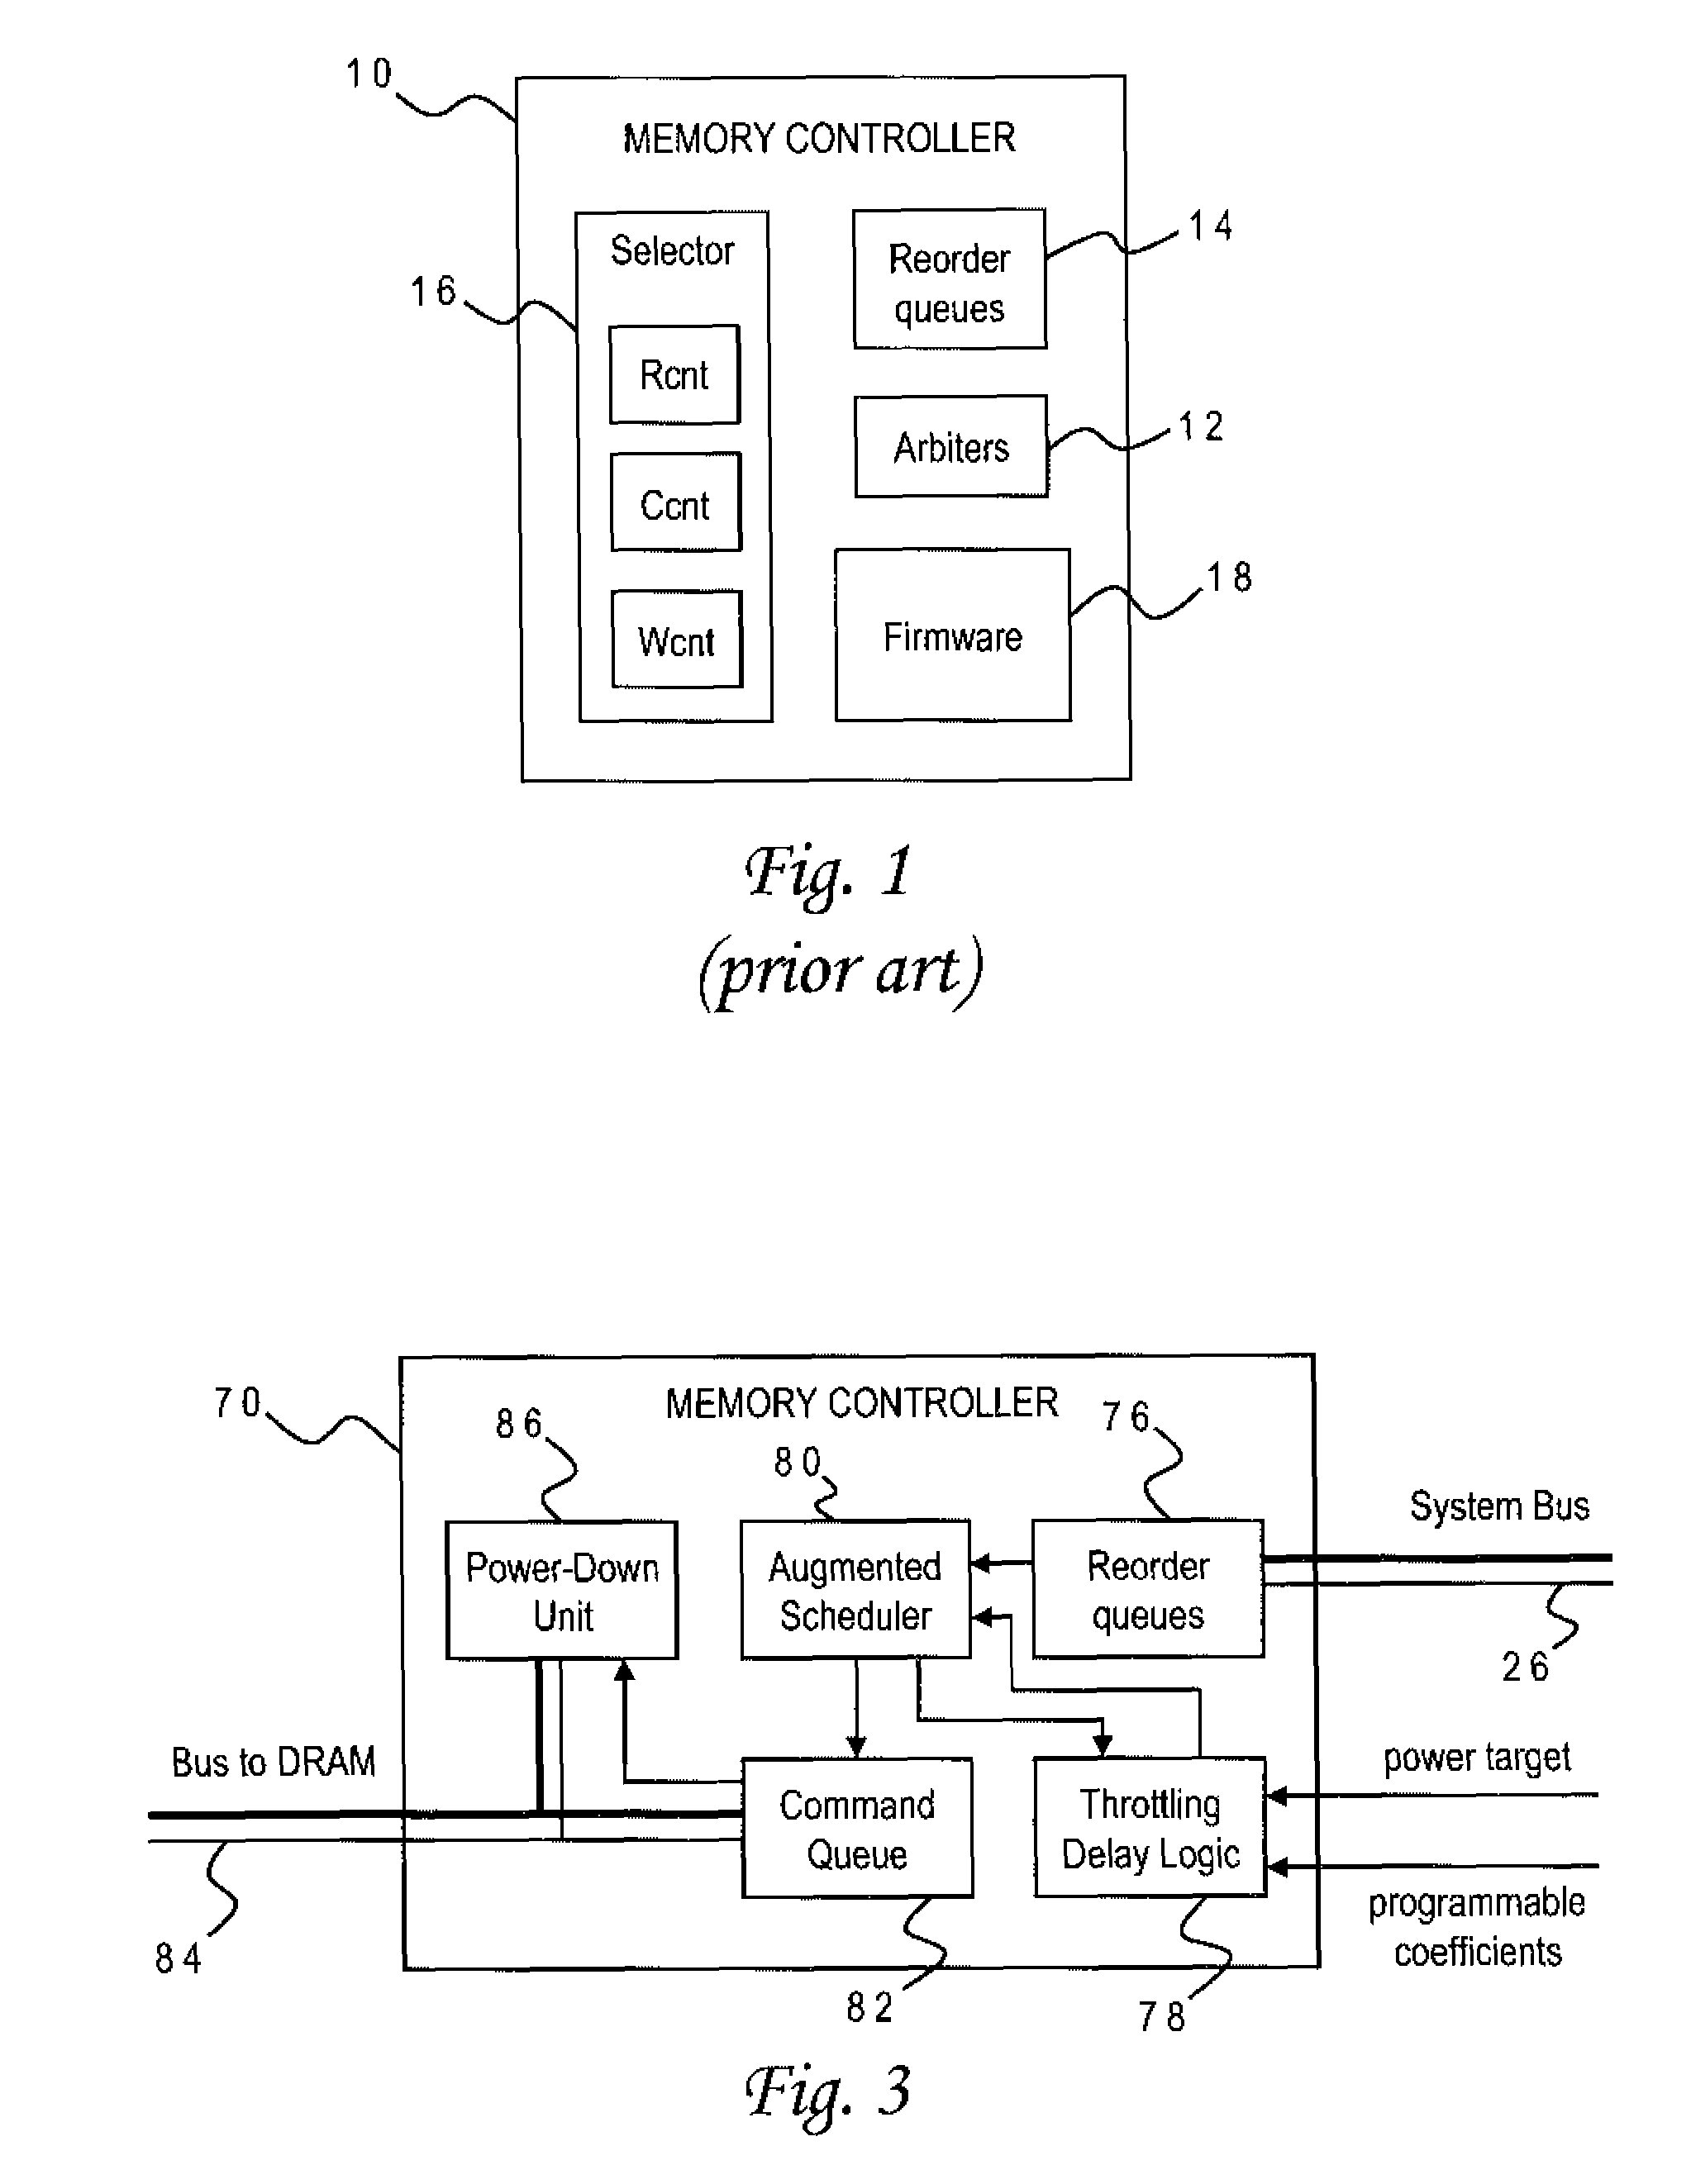 DRAM power management in a memory controller